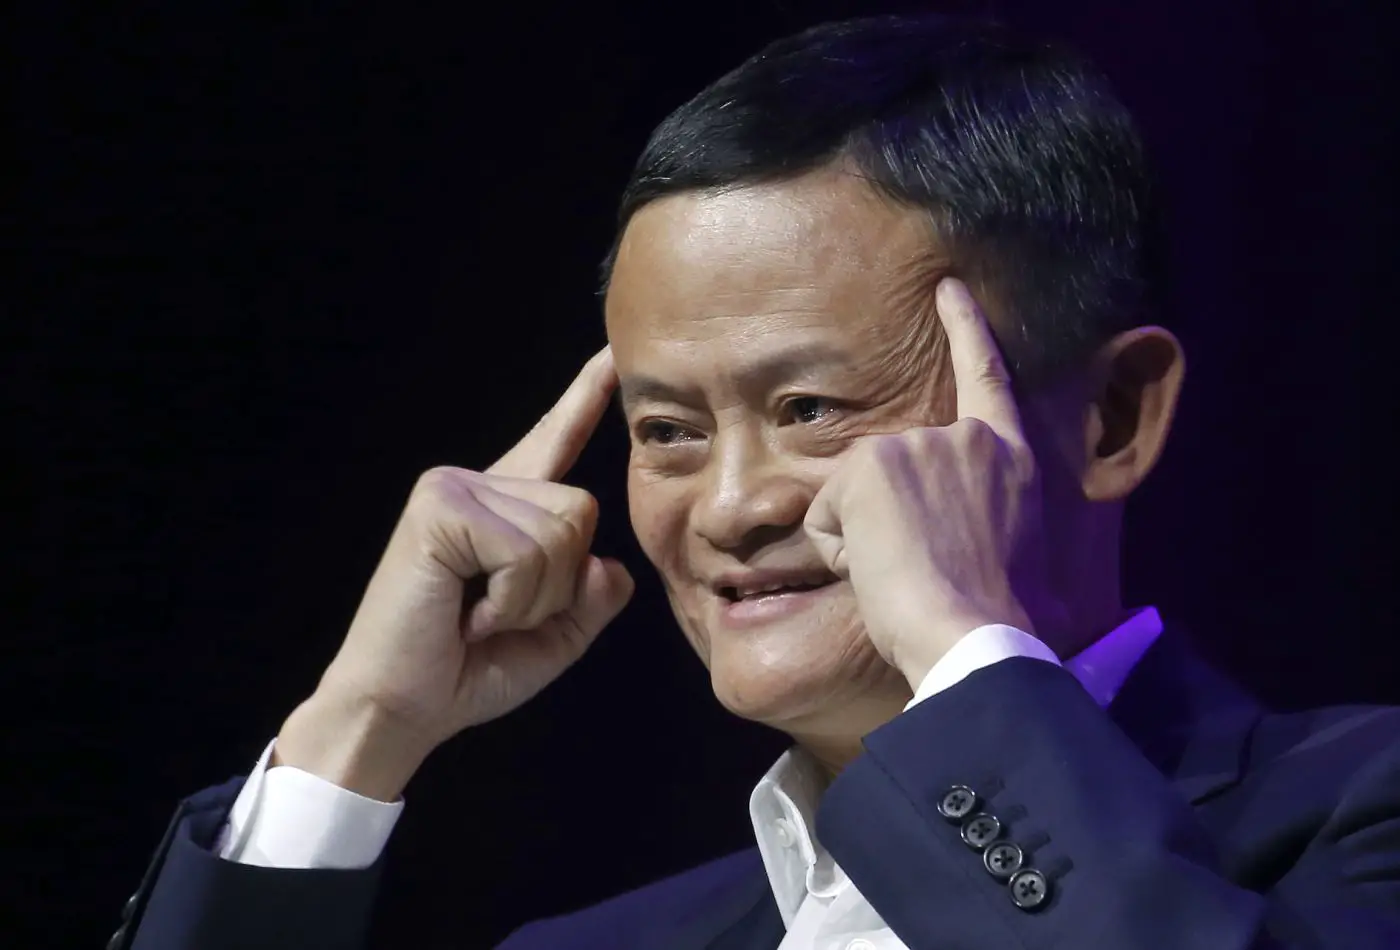 Chairman of Alibaba Group Holding Ltd. Jack Ma at the Viva Technology show in Paris, France.Chesnot | Getty Images News | Getty Images